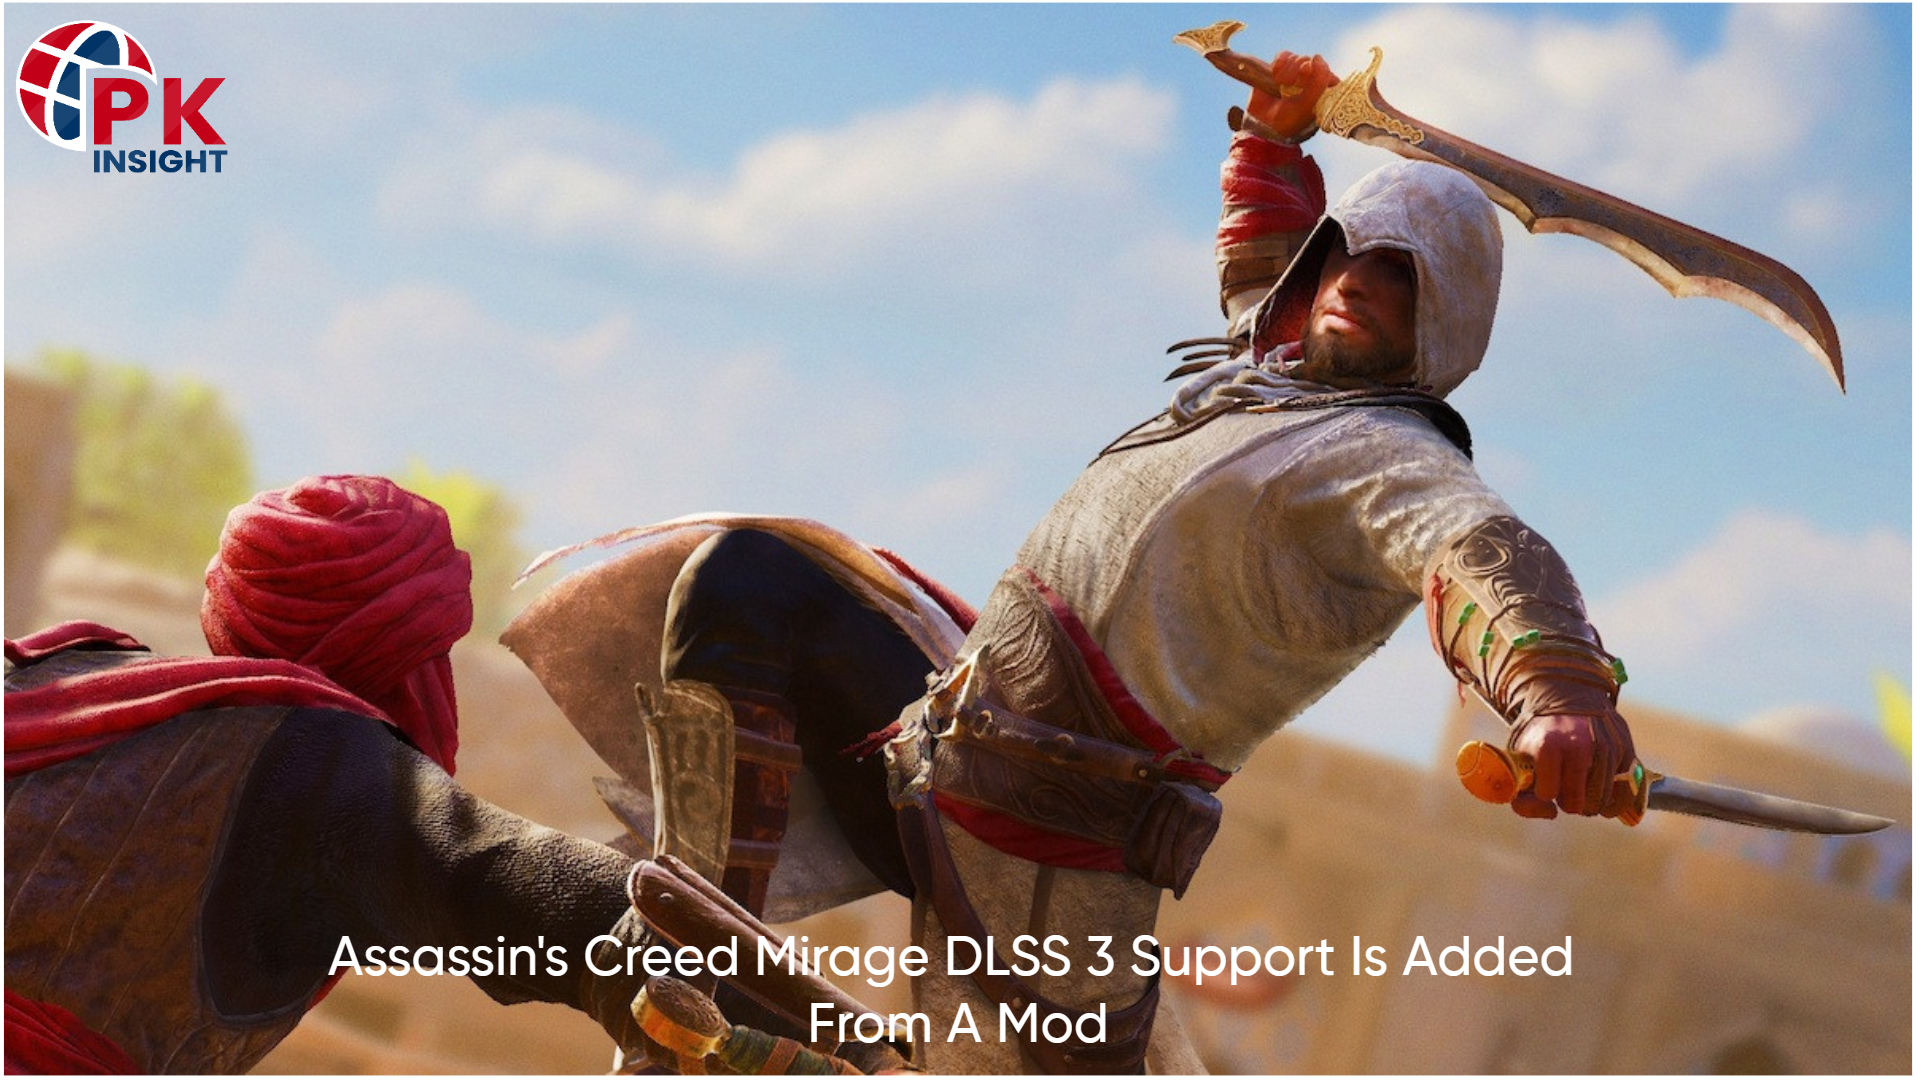 DLSS 3 Mods Released for Assassin's Creed Mirage and Lies of P